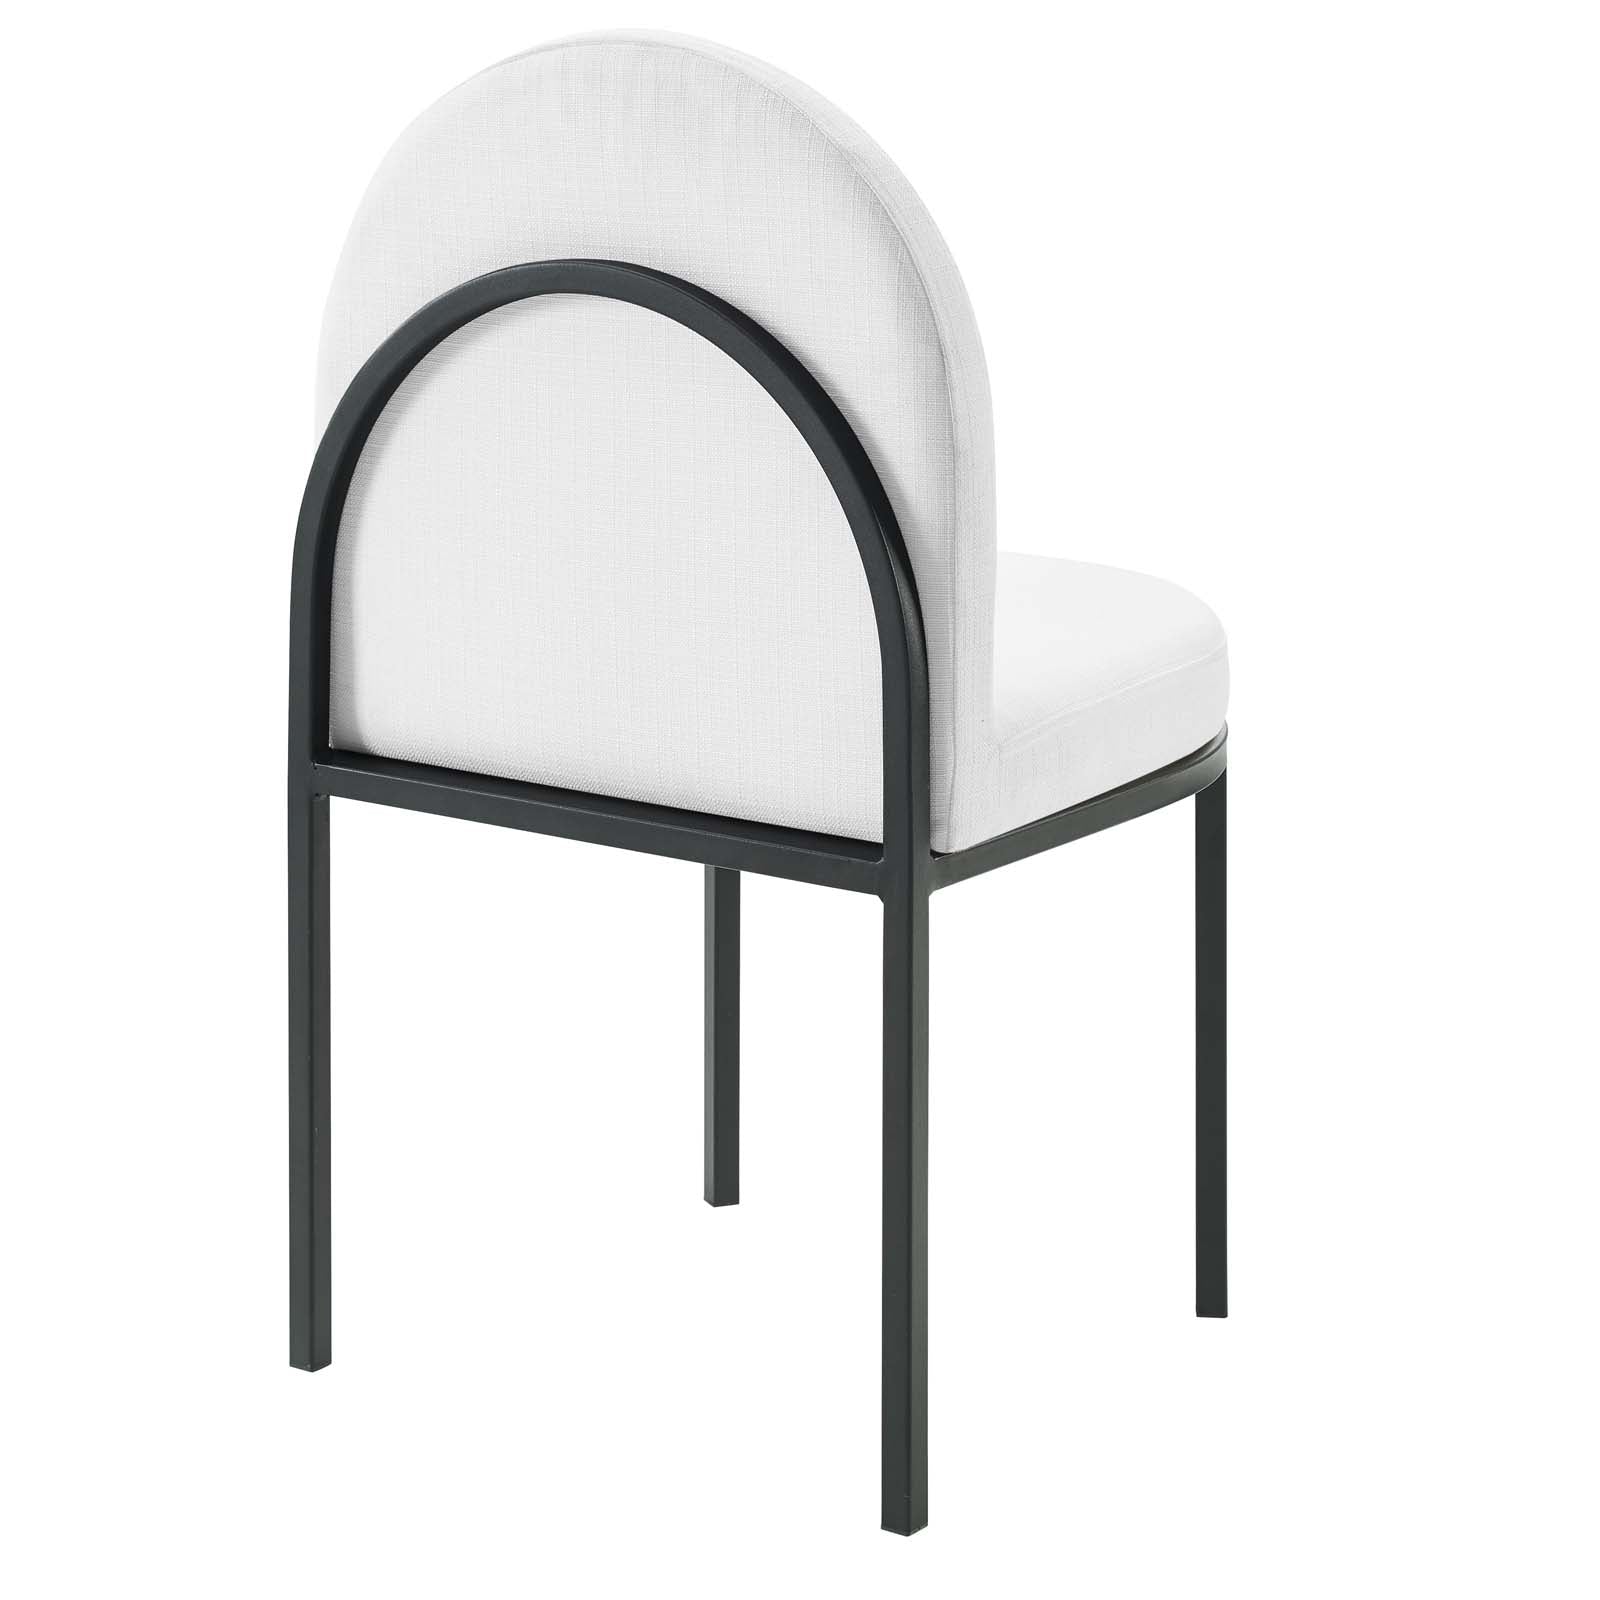 Modway Dining Chairs - Isla Channel Tufted Upholstered Fabric Dining Side Chair Black White